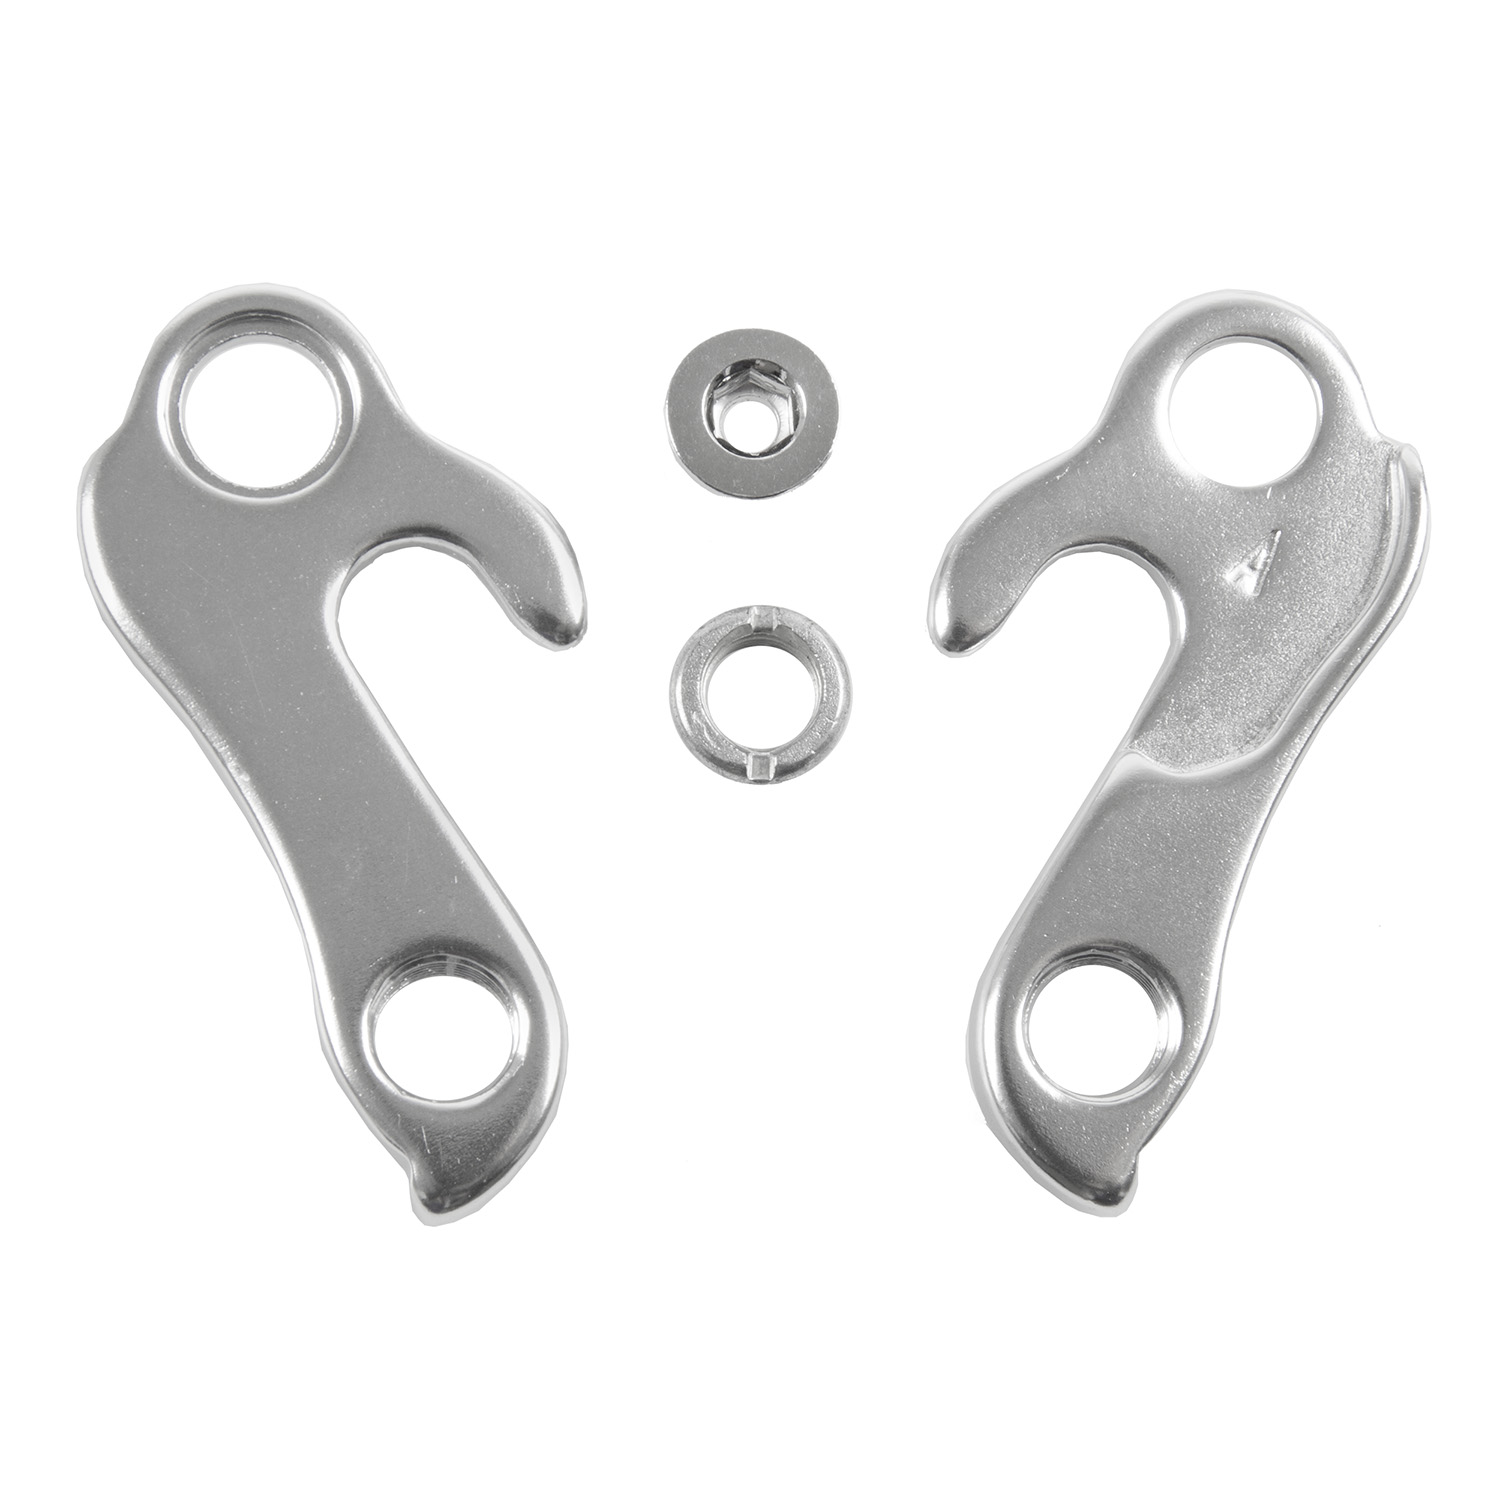 660888 S19 derailleur hanger – AVAILABLE IN SELECTED BIKE SHOPS